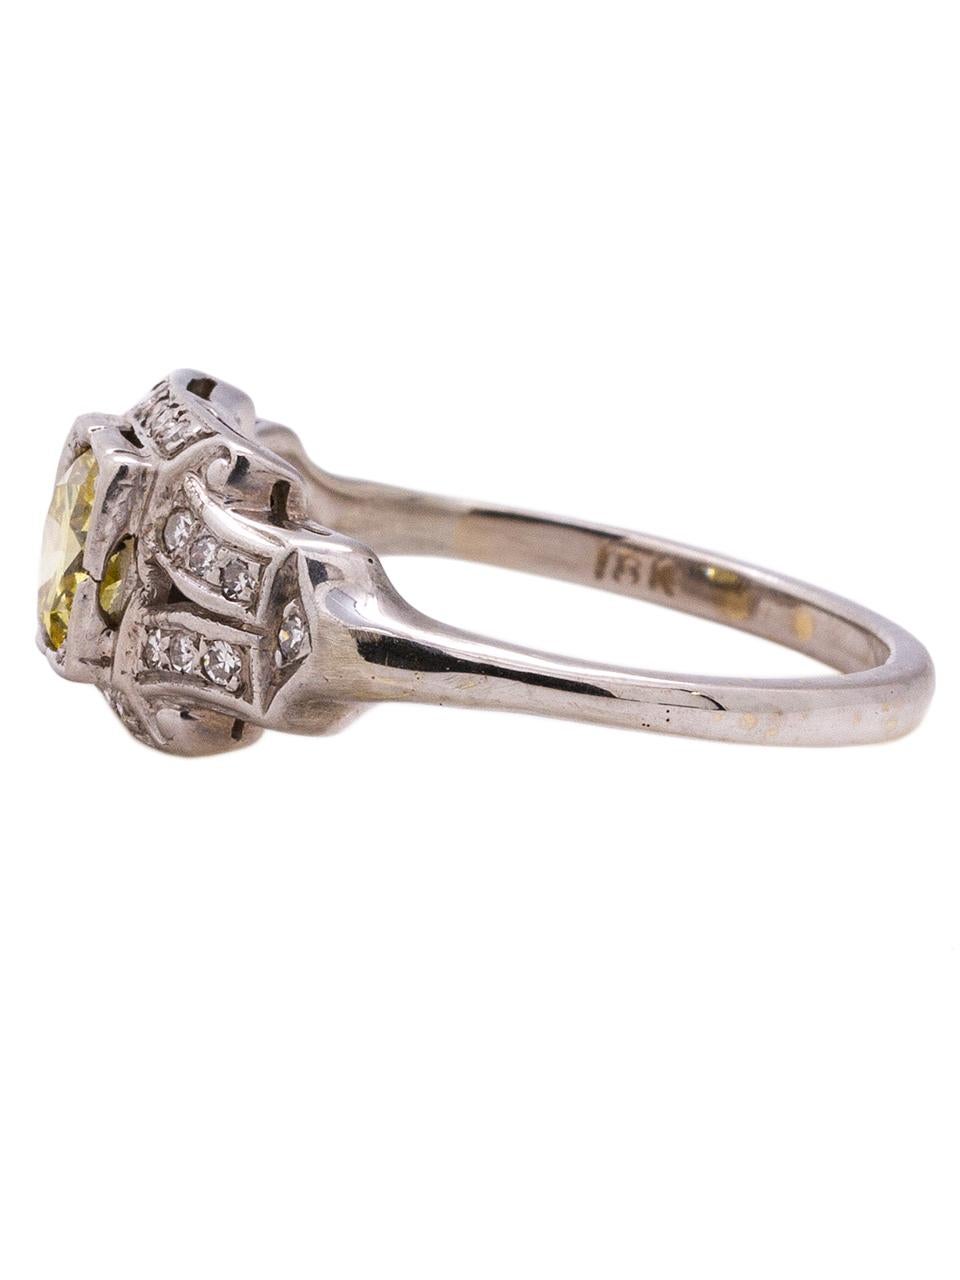 Classic Art Deco vintage 18k white gold engagement featuring a stunning 0.59ct fancy intense yellow, VS2 transitional cut round diamond. Twenty two bead set single cut side diamonds adorn the architecturally designed setting. The relatively low